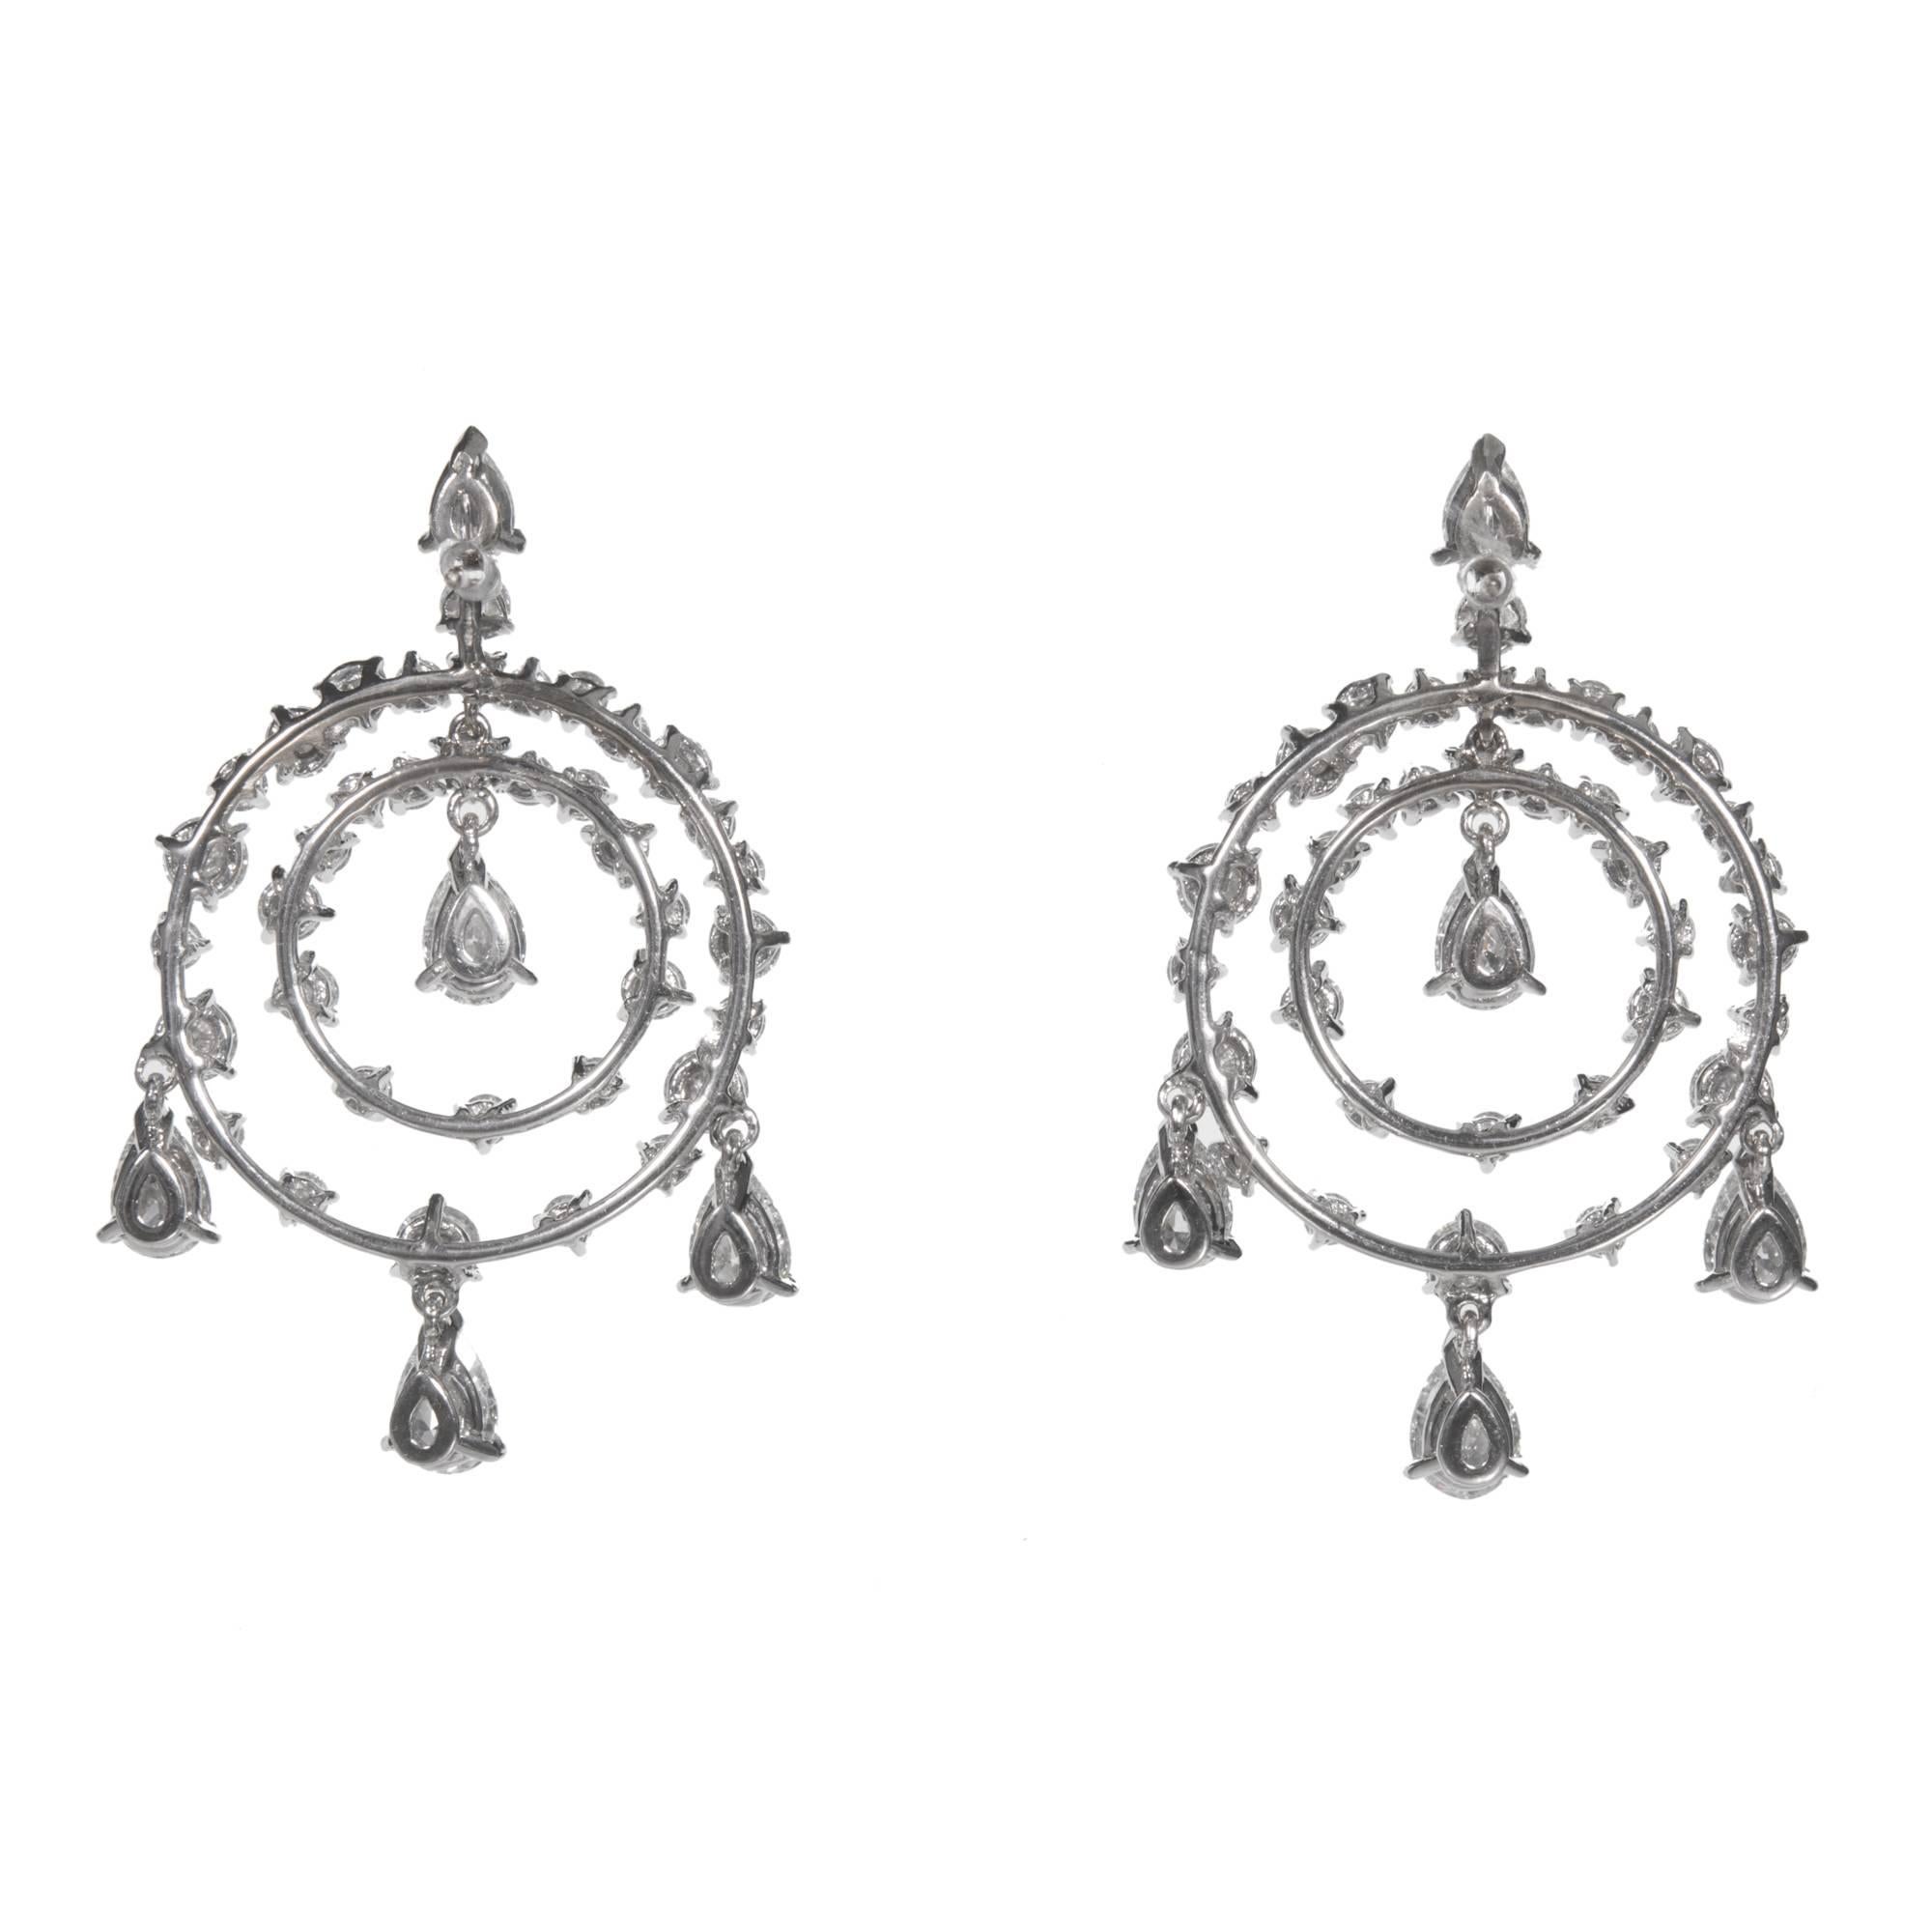 Van Cleef + Arpels Petillante Dormeuses diamond 18k White Gold chandelier earrings with pear shape and round ideal cut diamonds. Chandelier style with pierced posts. Correct serial number and hallmarks converted from clip to pierced. 

10 pear